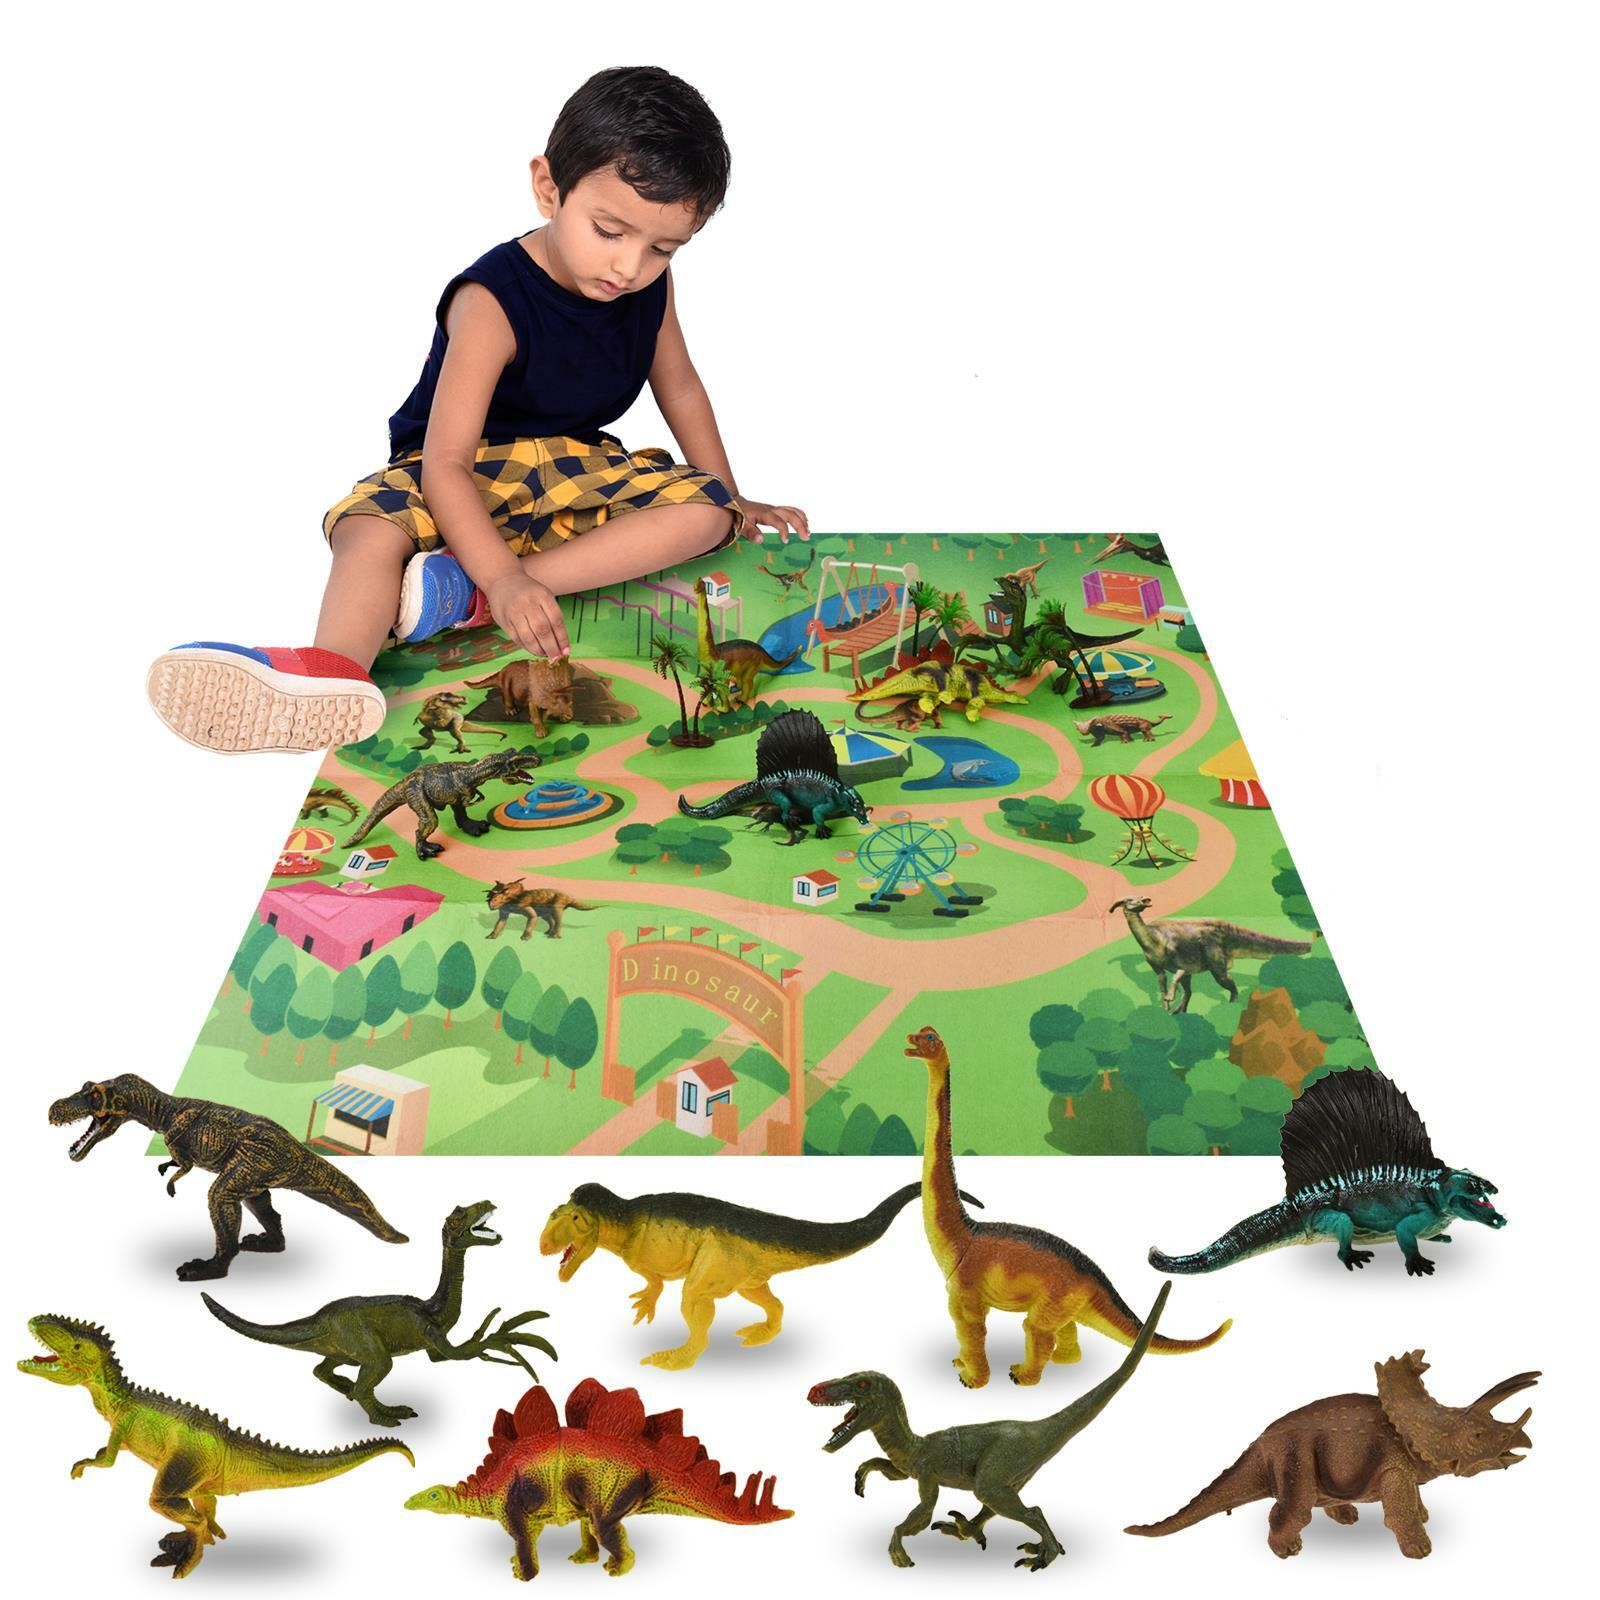 The Best Gift for Children Over 3 Years Old Baby Dinosaur Toys